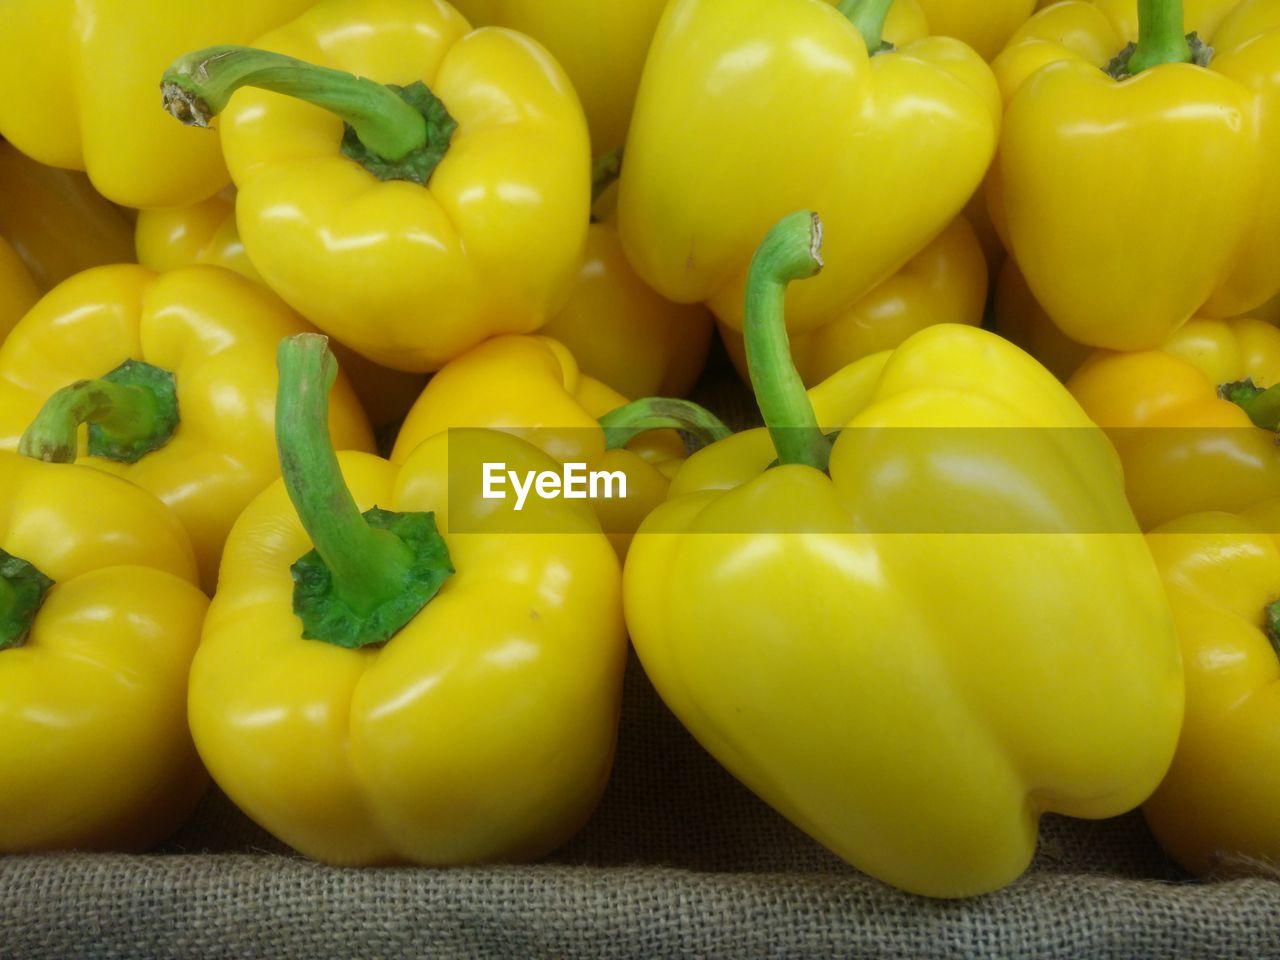 CLOSE-UP OF YELLOW AND TOMATOES